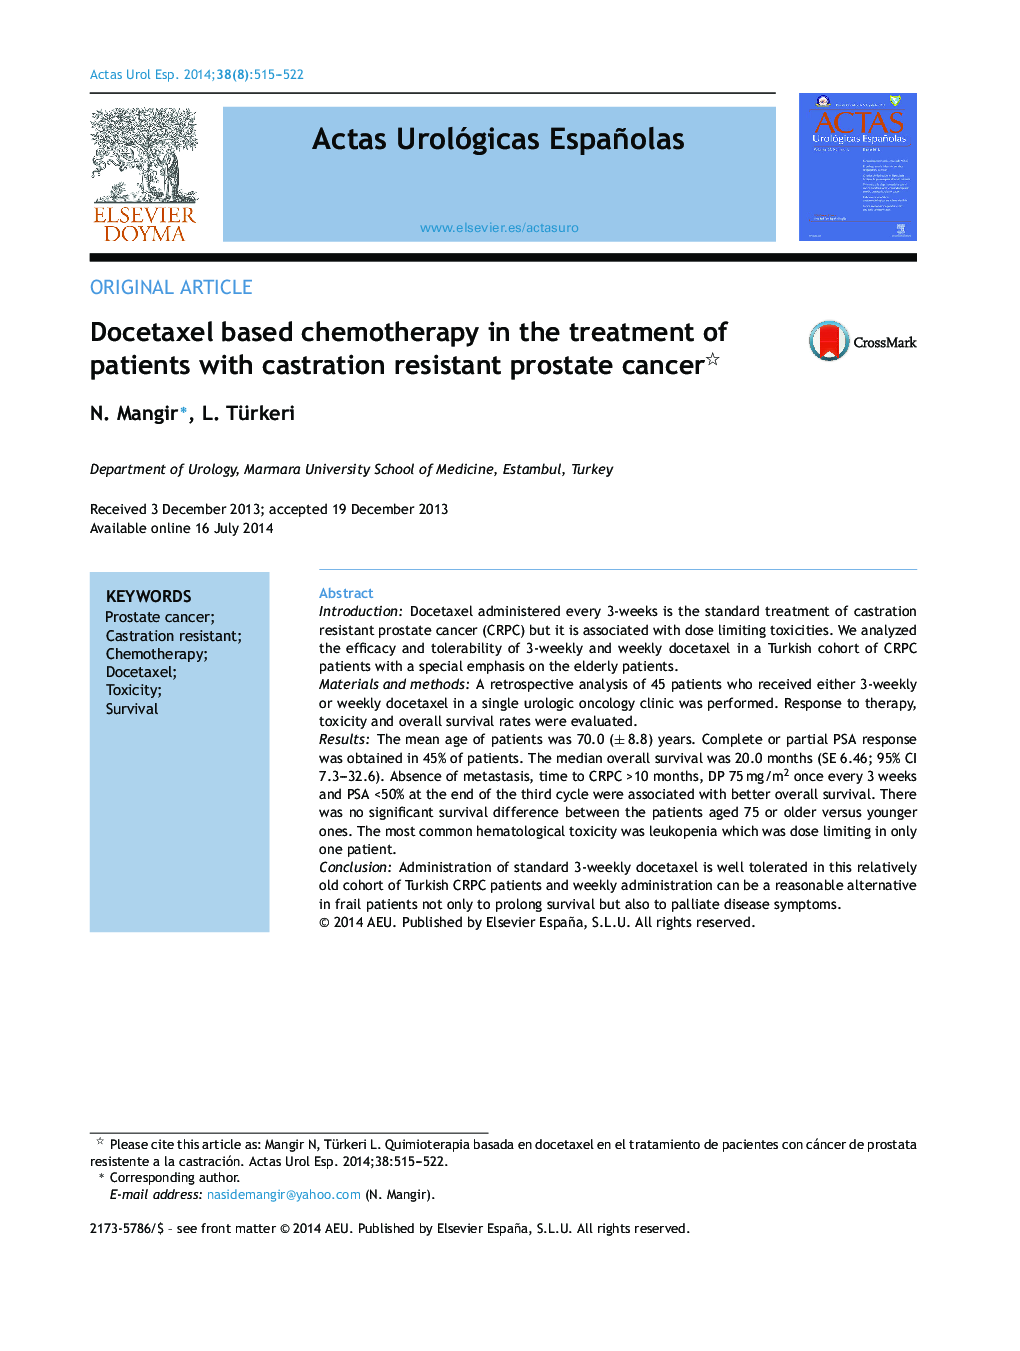 Docetaxel based chemotherapy in the treatment of patients with castration resistant prostate cancer 